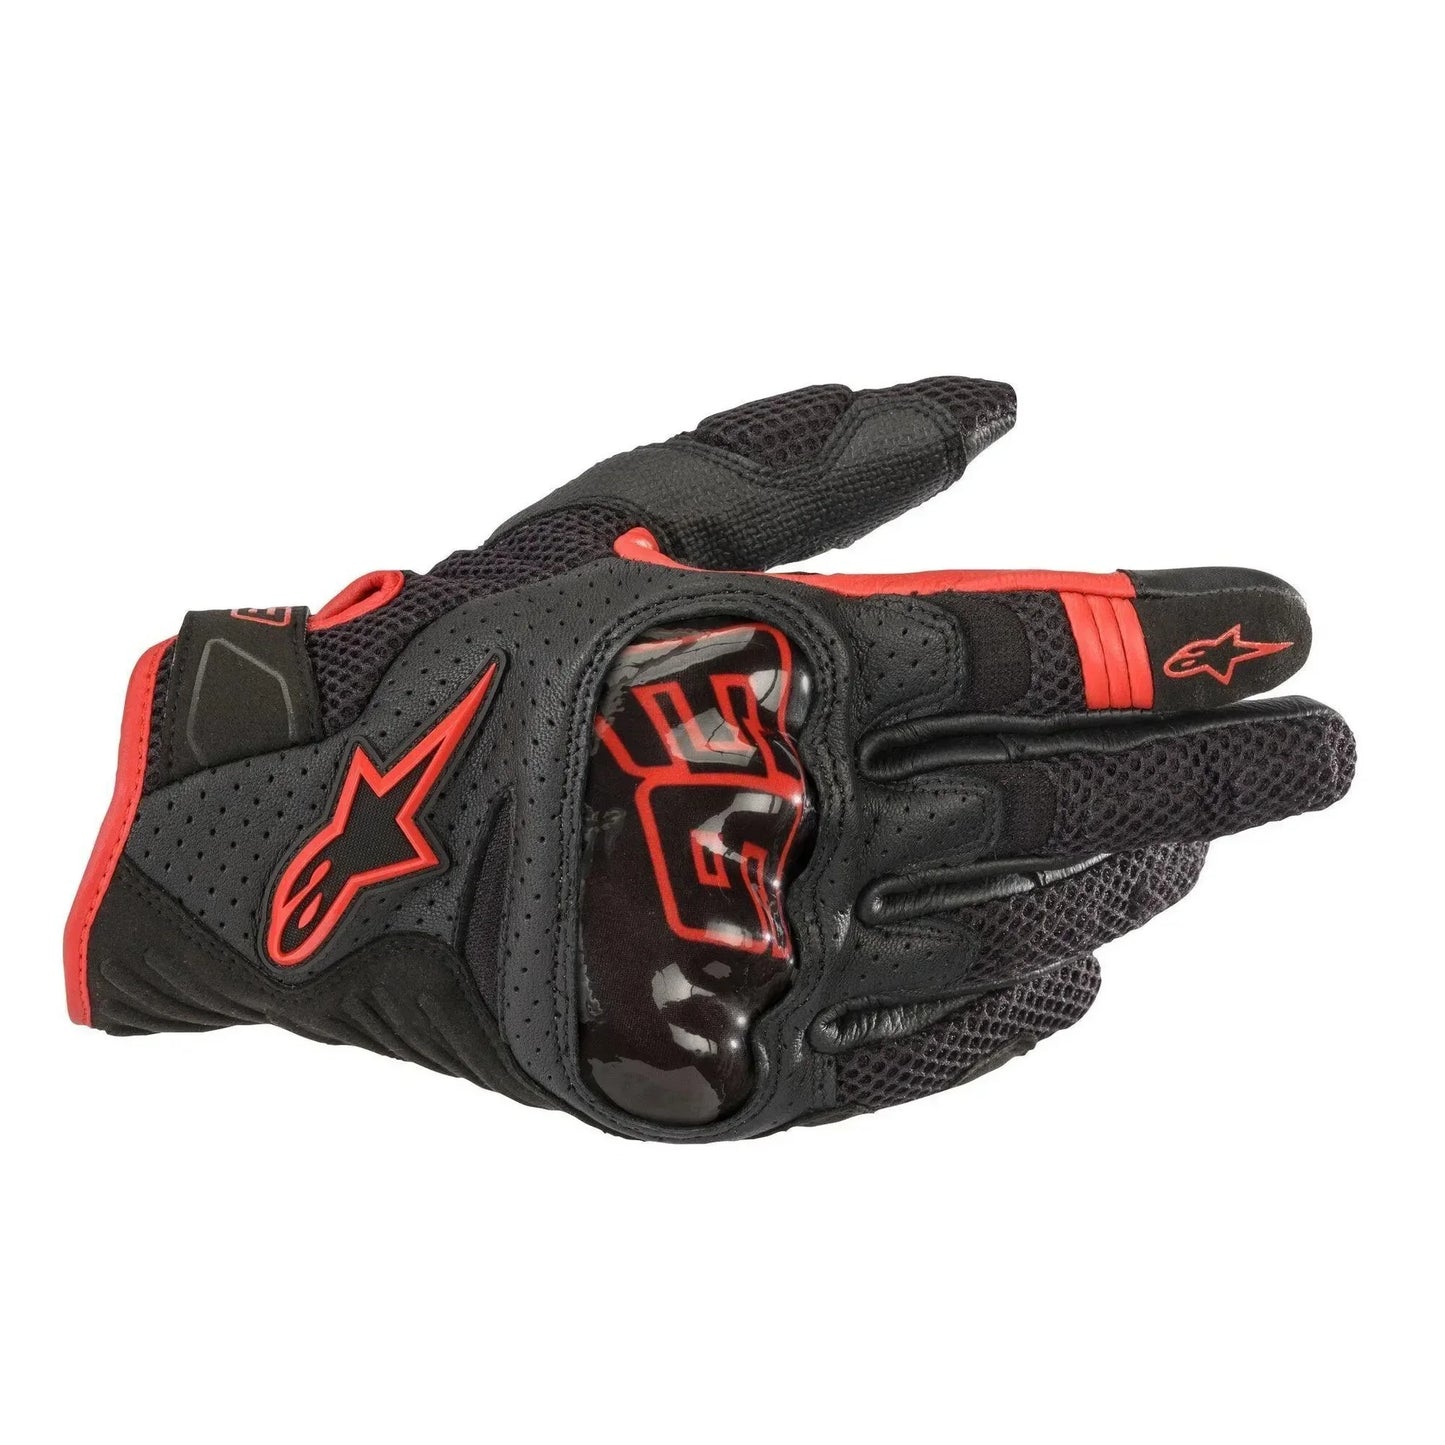 Italian A-star GPX original single racing gloves, motorcycle riding leather anti drop all season wind resistant gloves